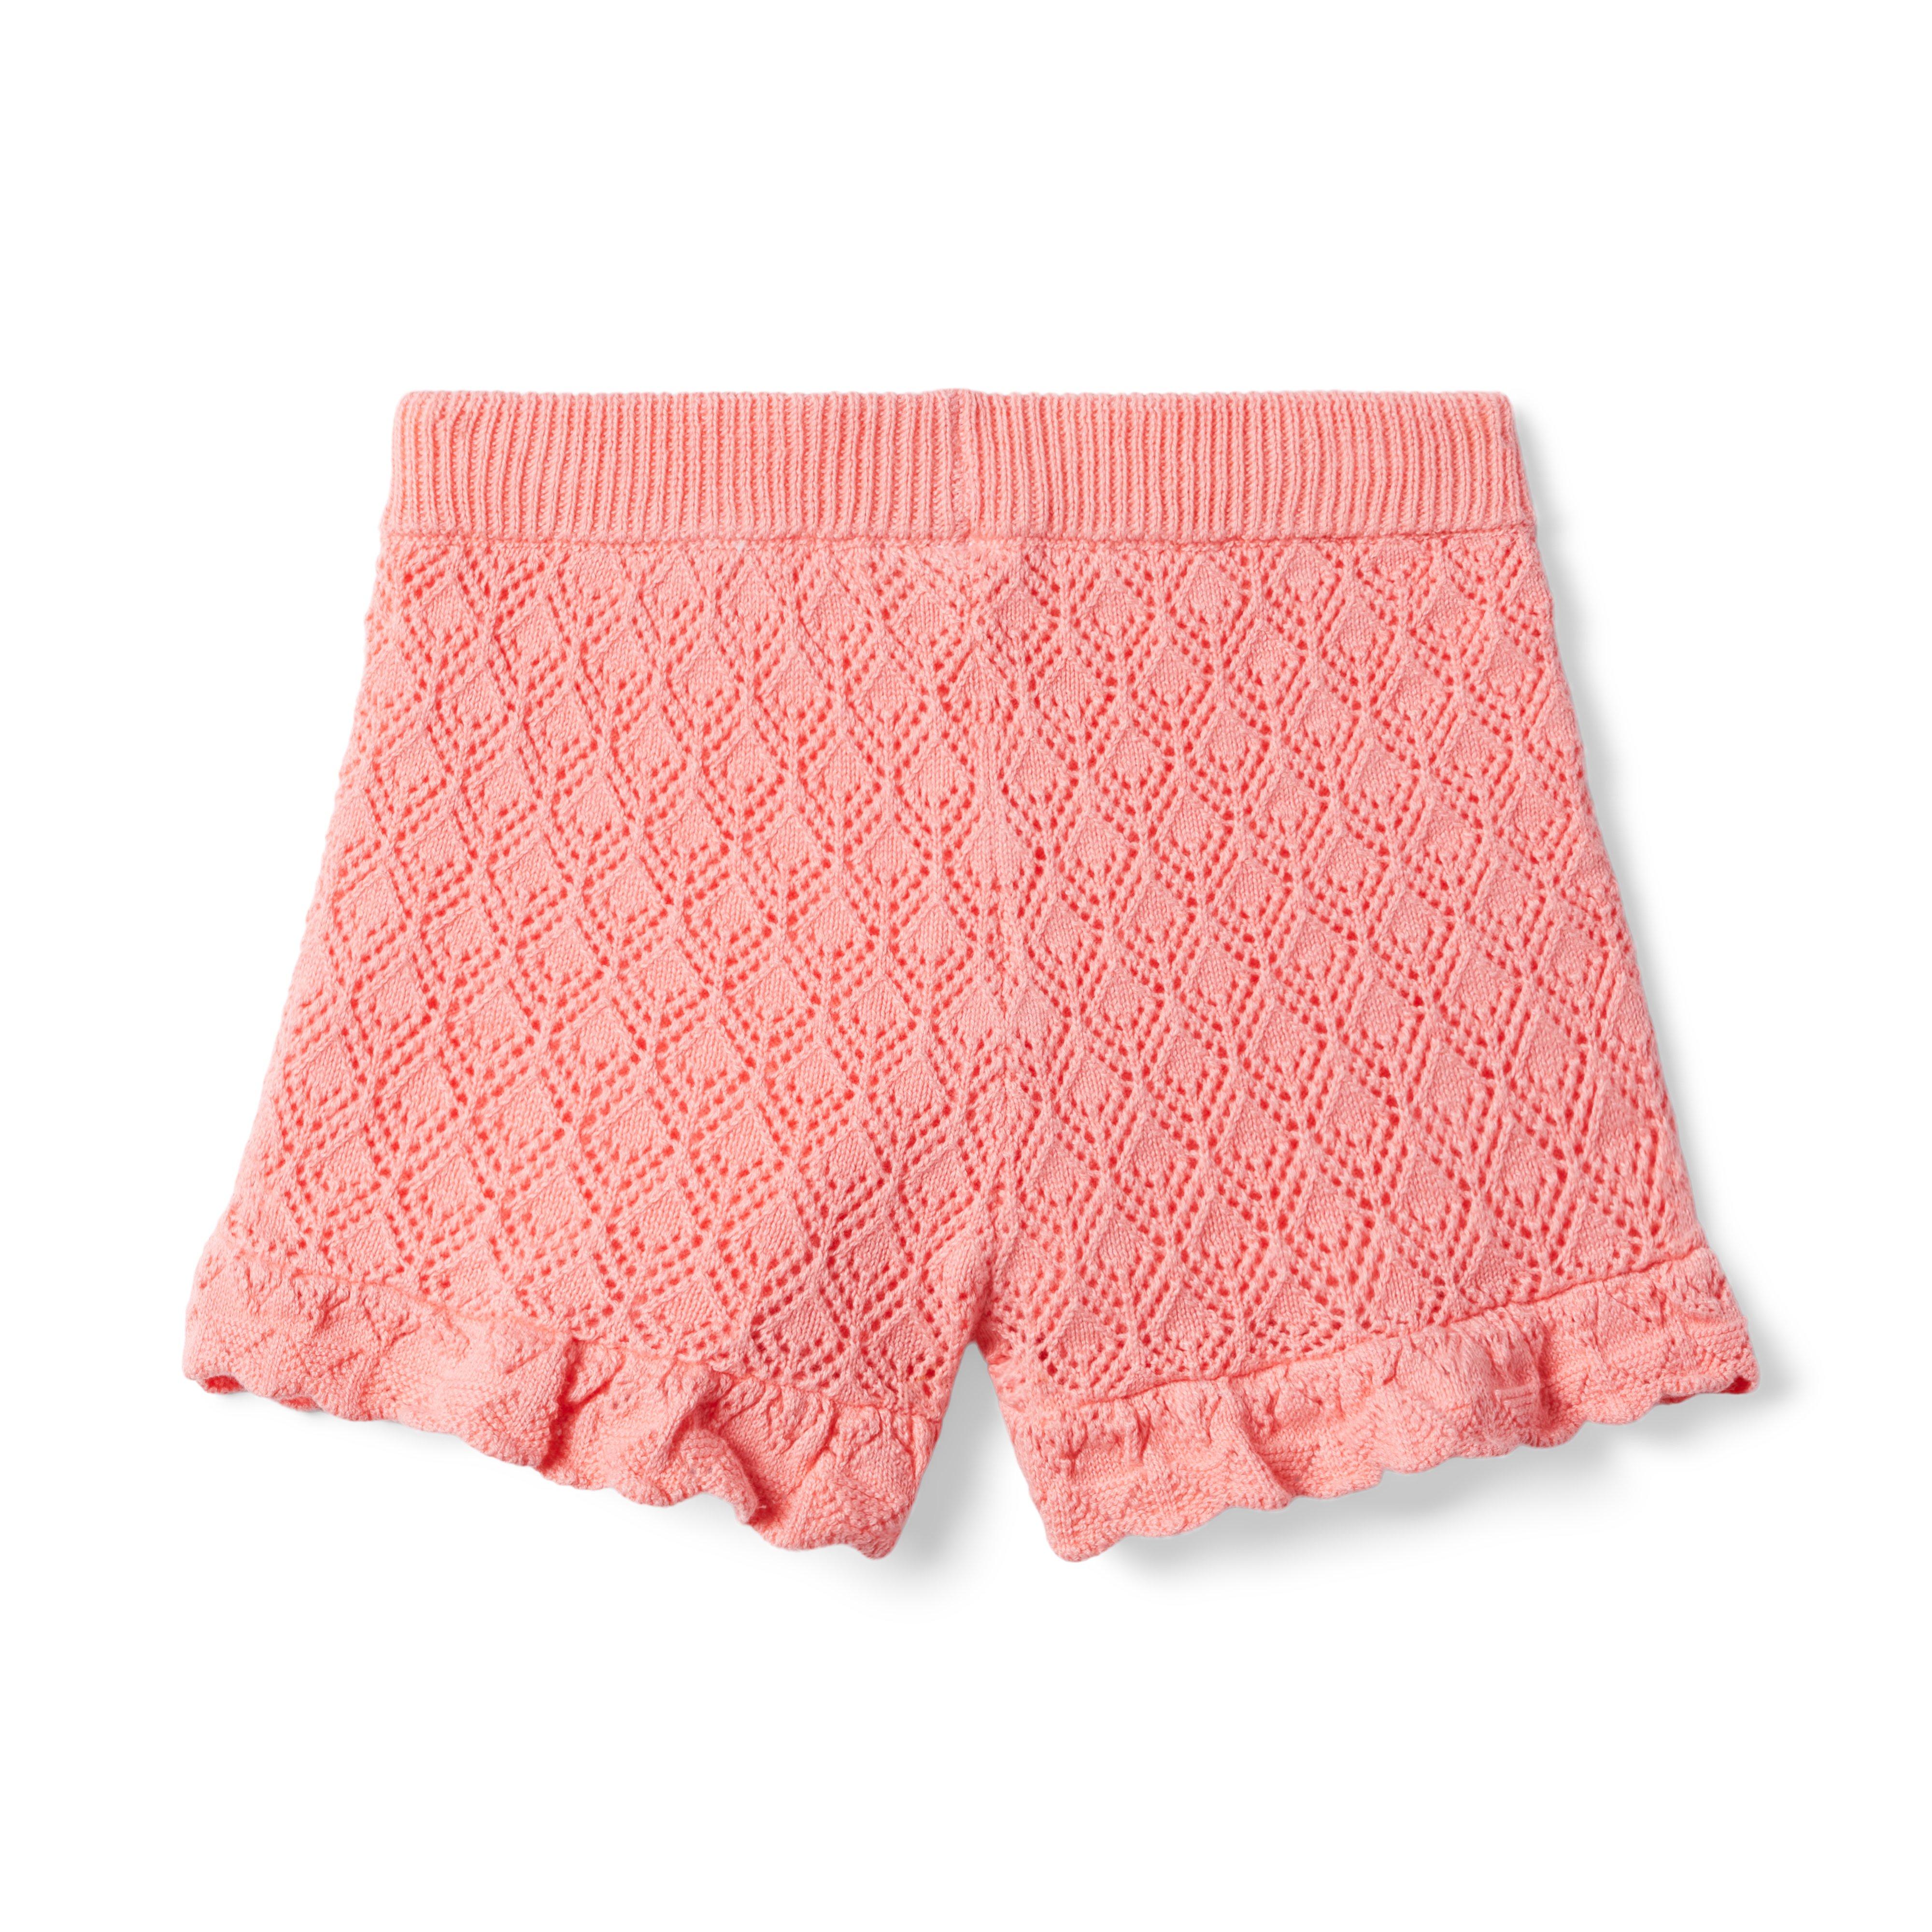 Girl Salmon Rose The Crochet Getaway Short by Janie and Jack